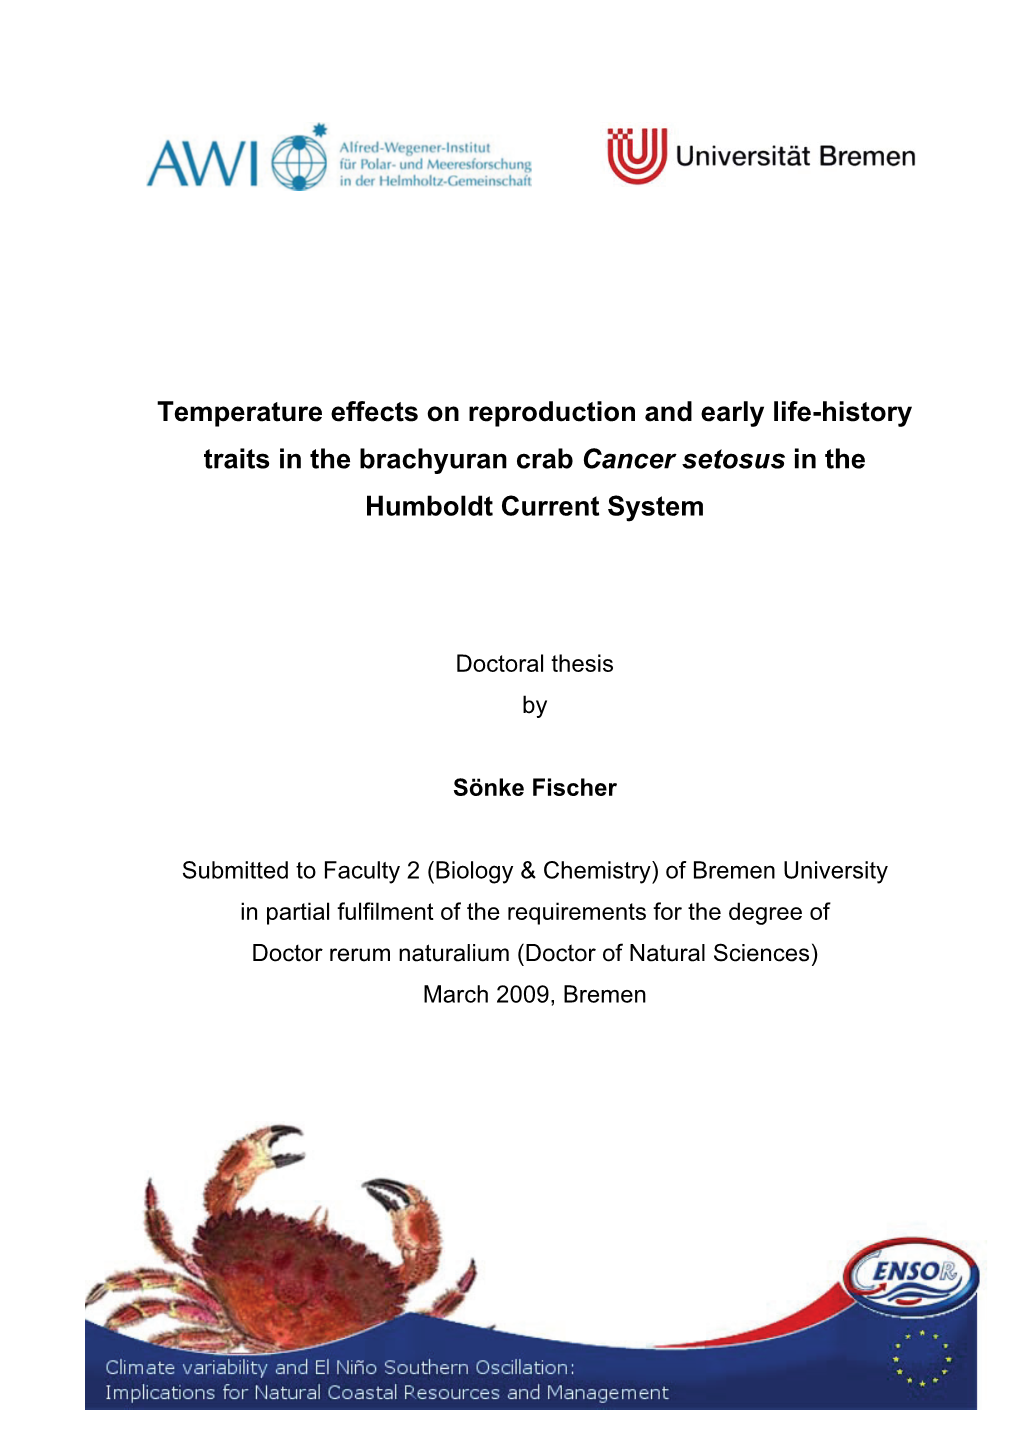 Temperature Effects on Reproduction and Early Life-History Traits in the Brachyuran Crab Cancer Setosus in the Humboldt Current System